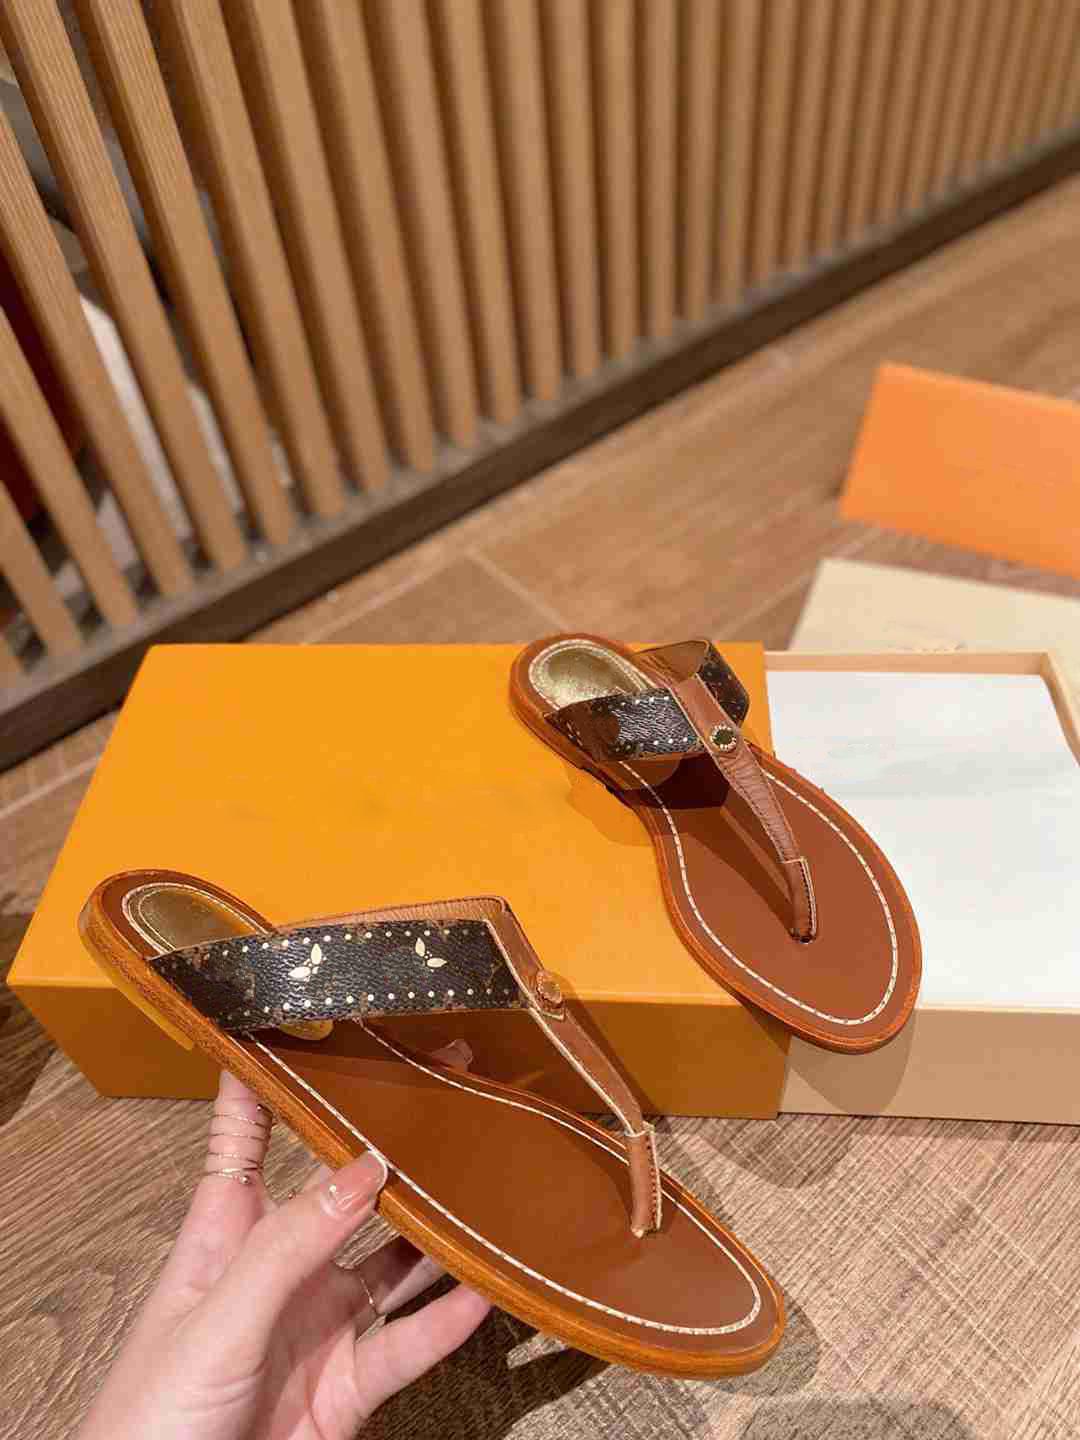 

2023 Luxury Gradient Slippers For Sale Sunrise Pastel Sunny Flat Thongs Sold With Box Spring In The City Sandals